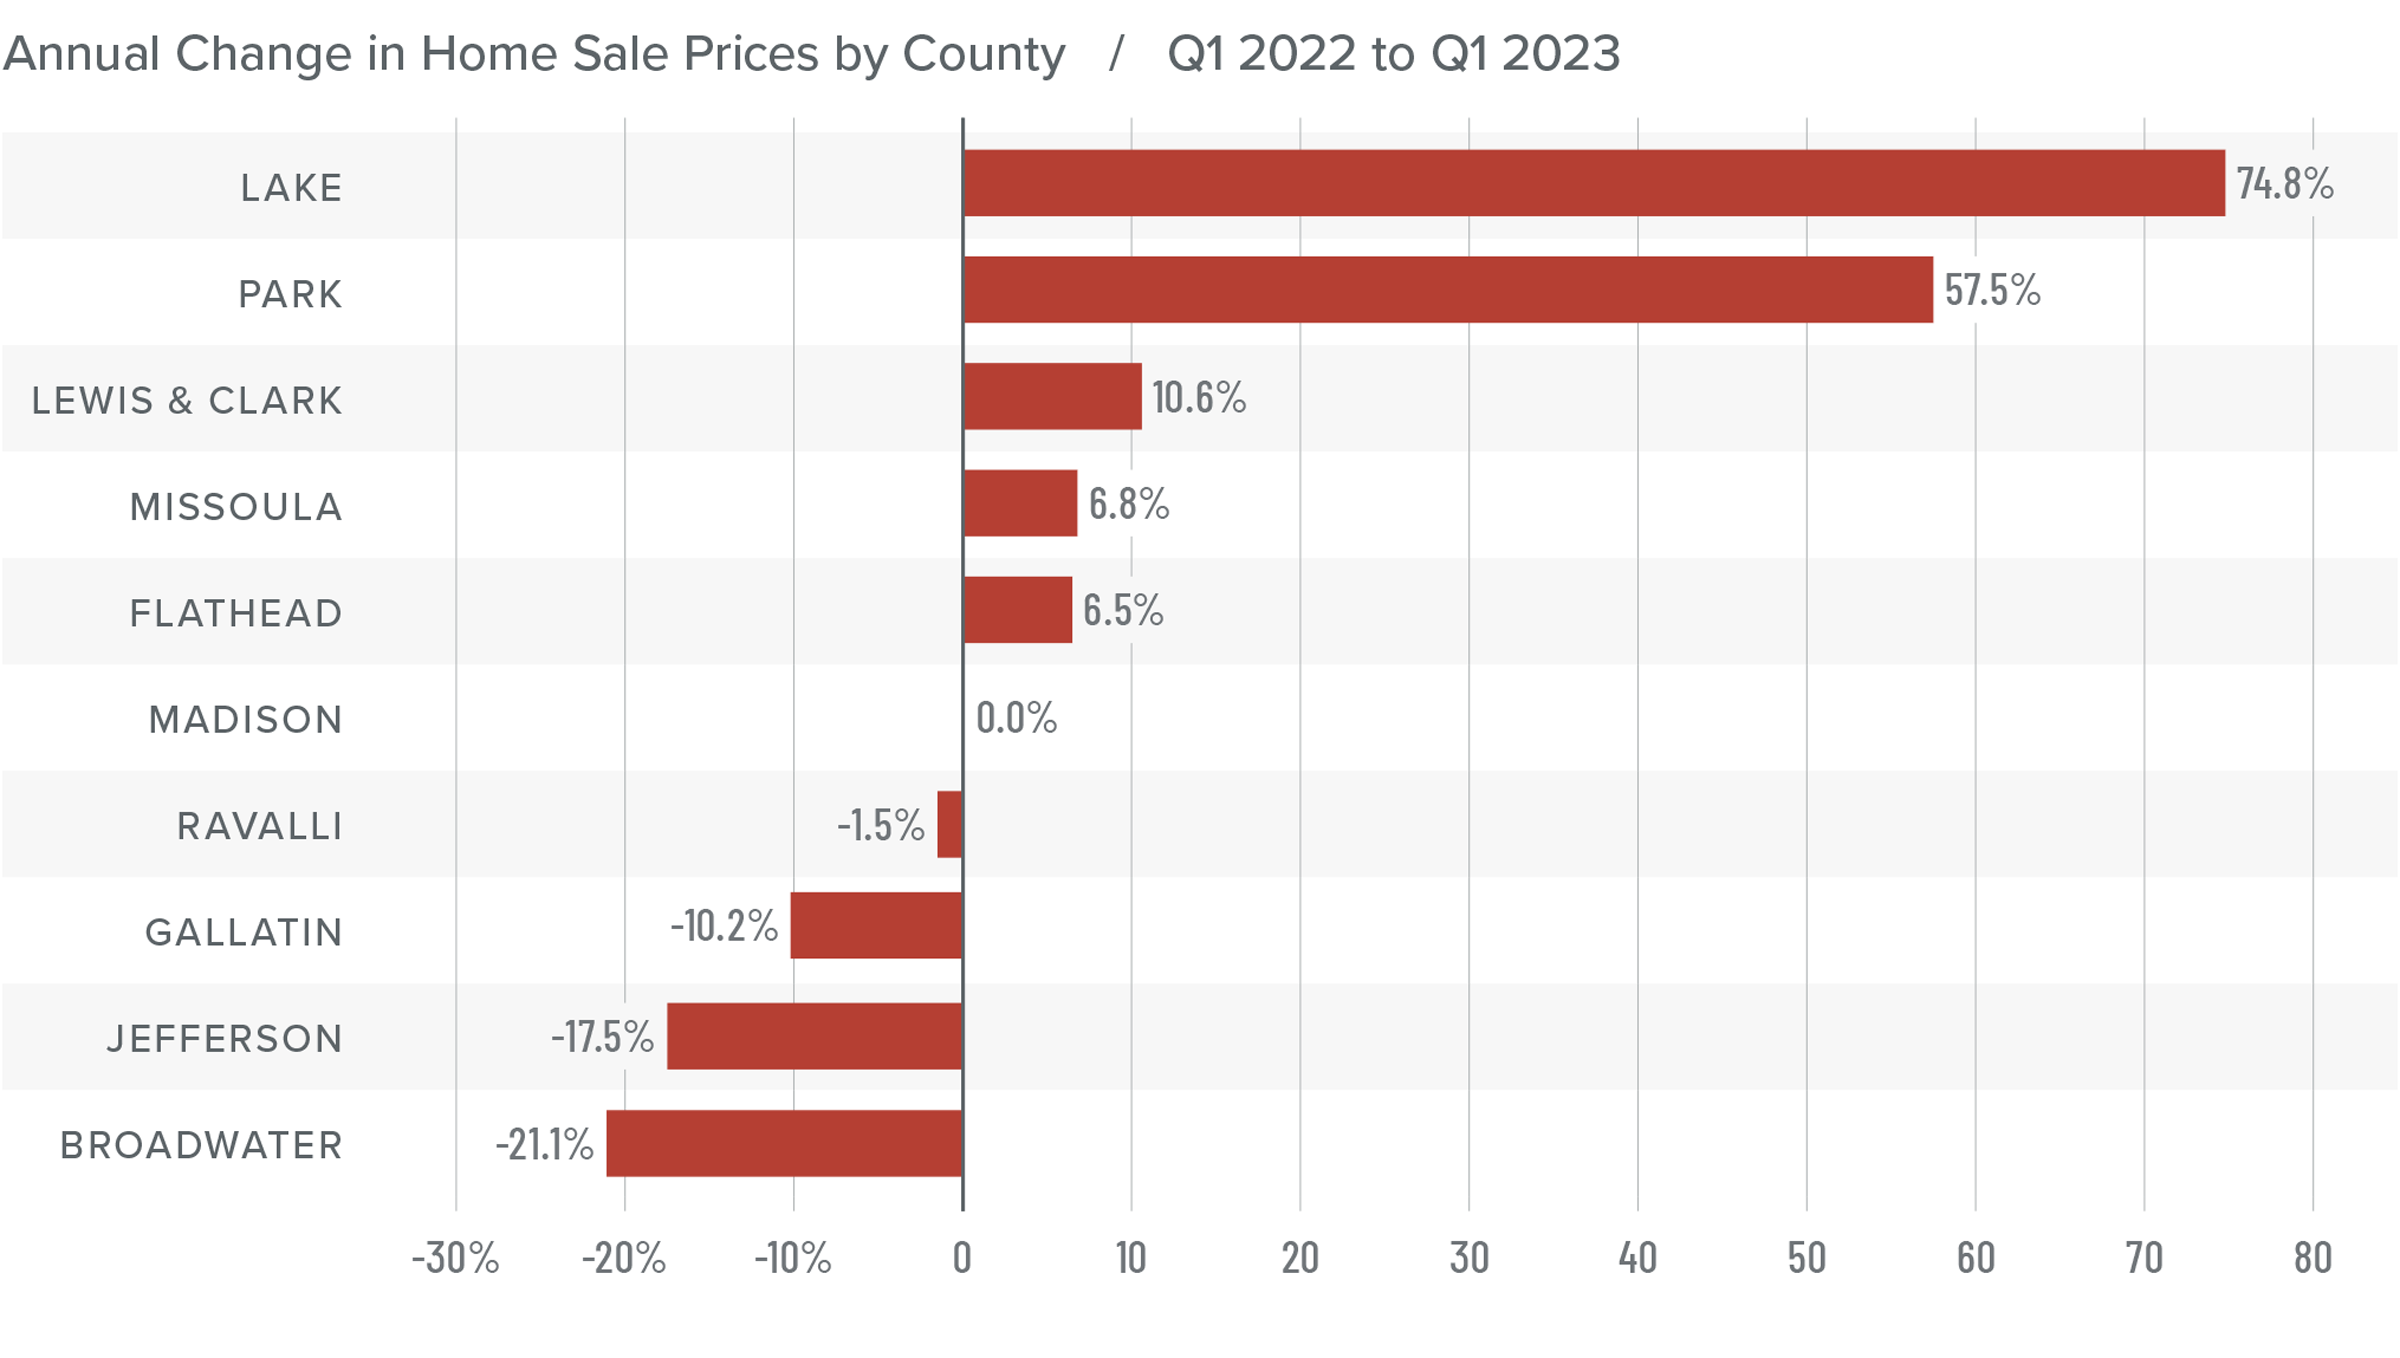 A bar graph showing the annual change in home sale prices for various counties in Montana from Q1 2022 to Q1 2023. Lake is at 74.8%, Park 57.5%, Lewis & Clark 10.6%, Missoula -6.8%, Flathead -6.5%, Madison 0%, Ravalli -1.5%, Gallatin -10.2%, Jefferson -17.5%, and Broadwater -21.1%.